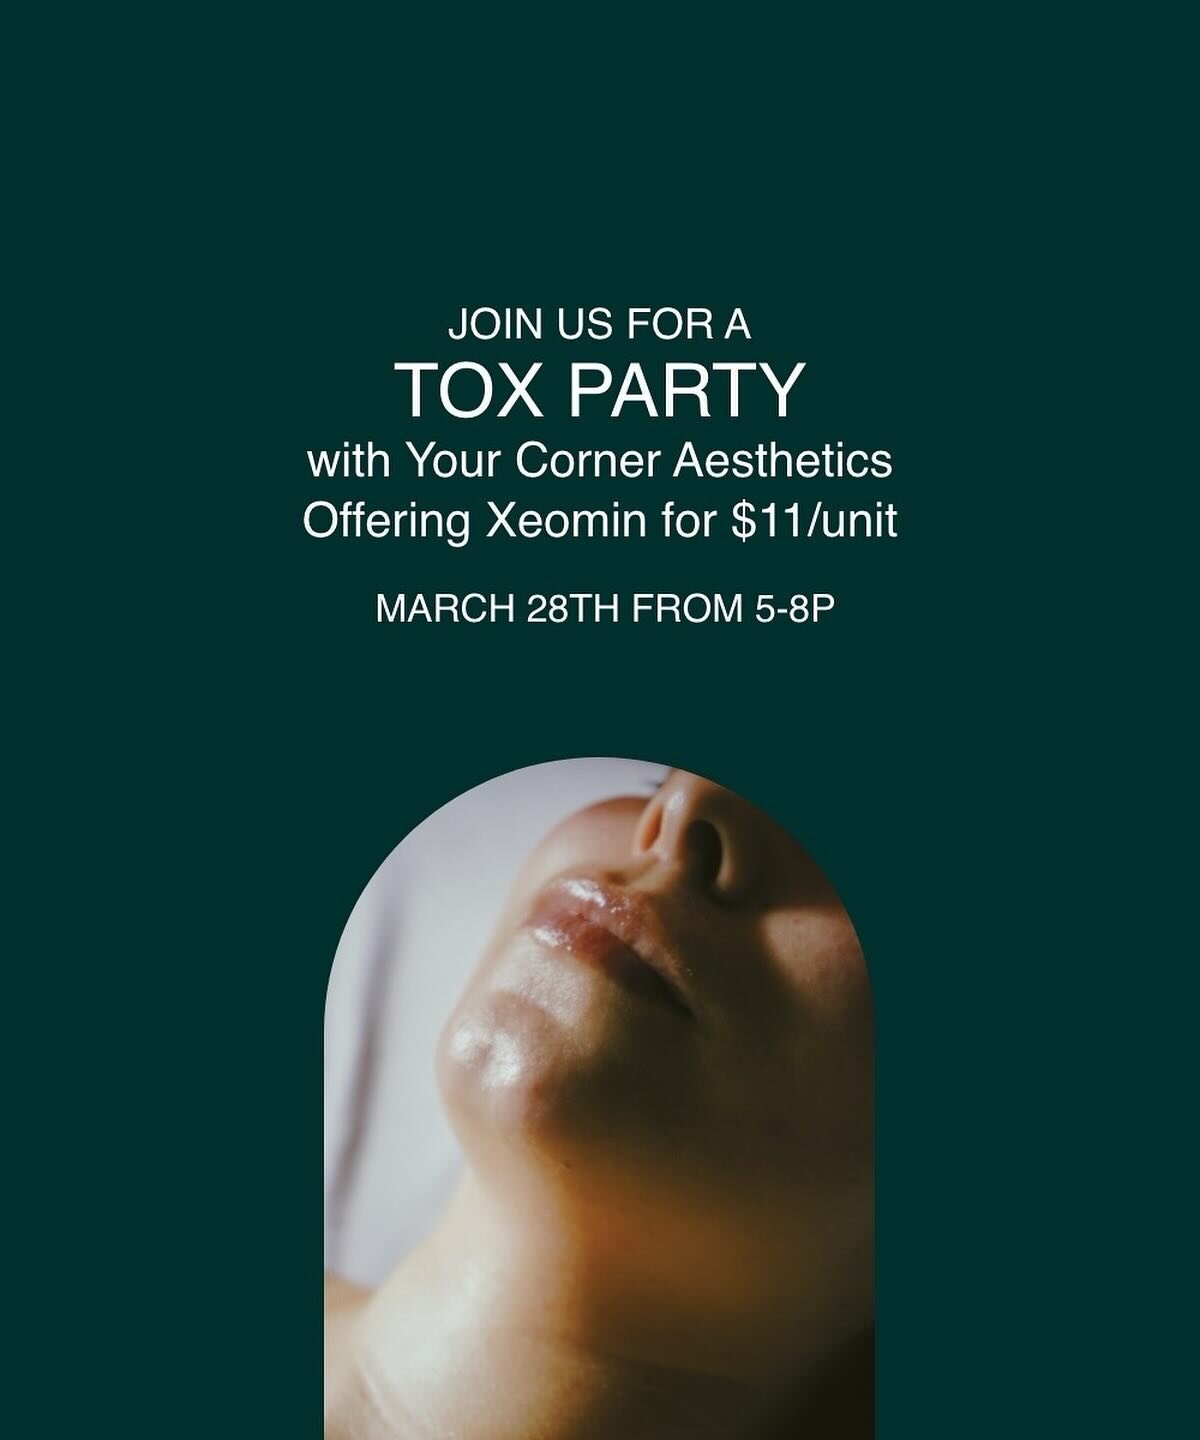 It&rsquo;s your favorite: Tox (Xeomin) Night with @yourcorneraesthetics on March 28th from 5-8pm. See you there!